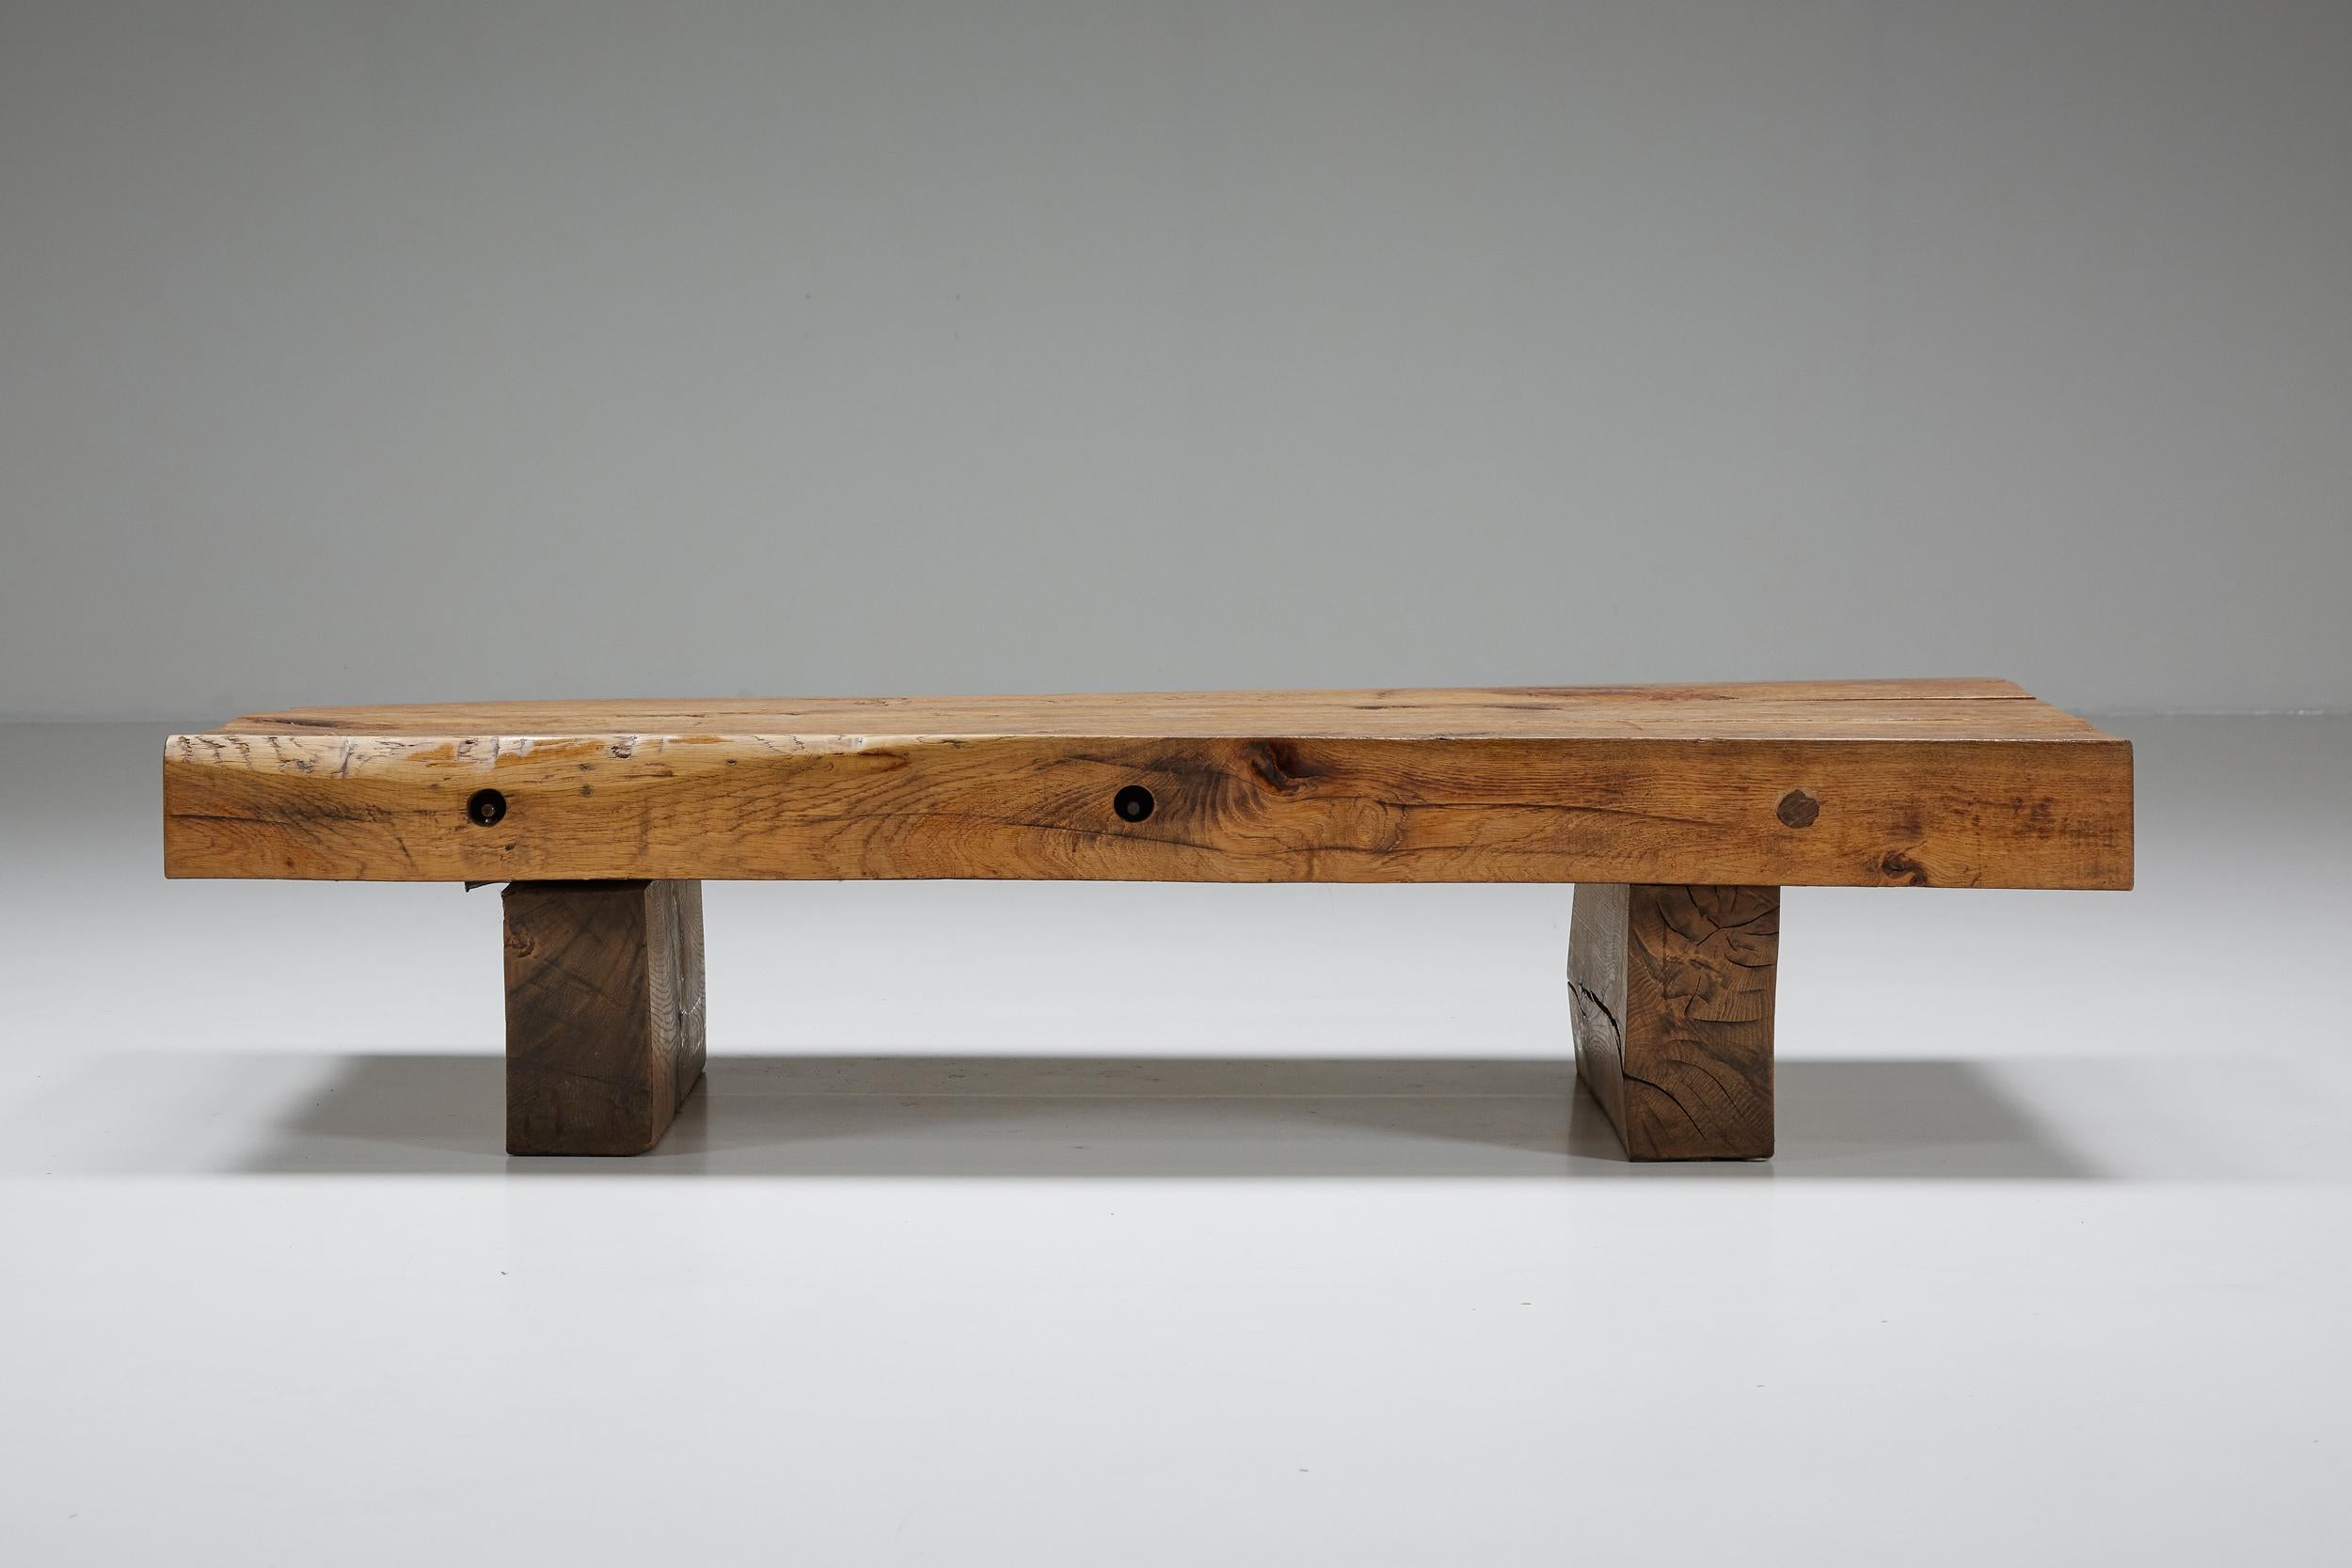 Rustic solid wood coffee table V; Mid-Century Modern

Rustic solid wood coffee table with a beautiful patina. 
A perfect example of a wabi-sabi zen decor, in original condition.